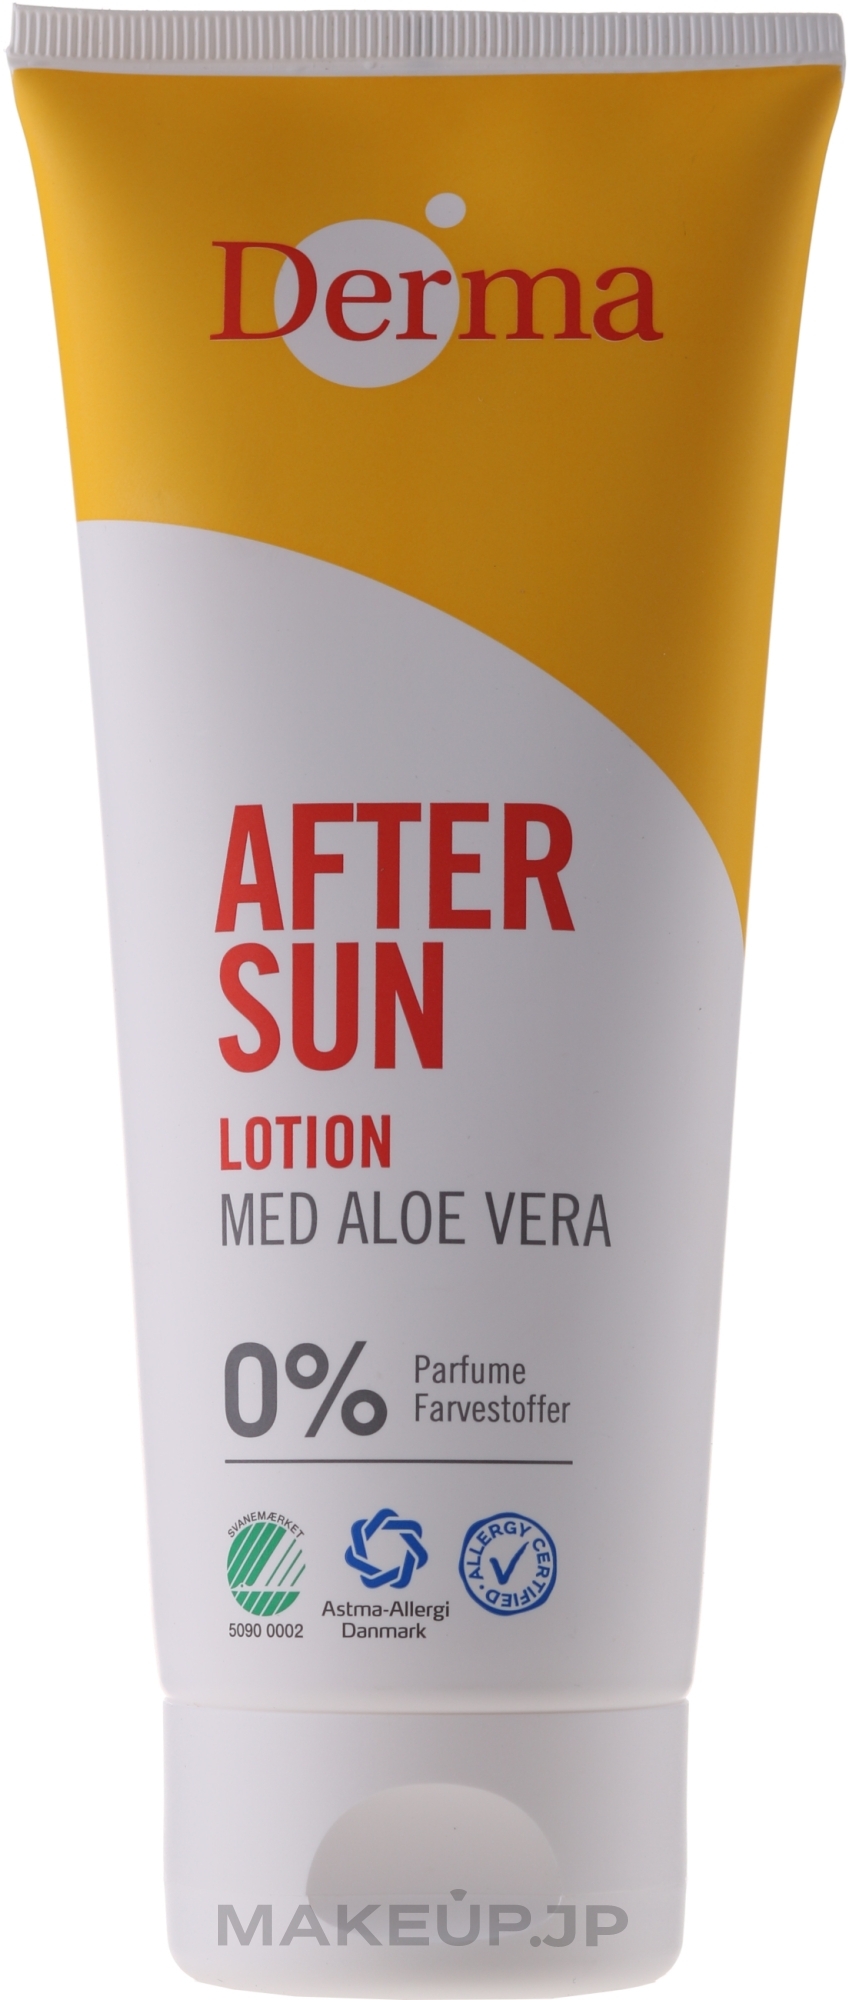 After Tanning Lotion with Aloe Extract - Derma After Sun Lotion Med Aloe Vera — photo 200 ml